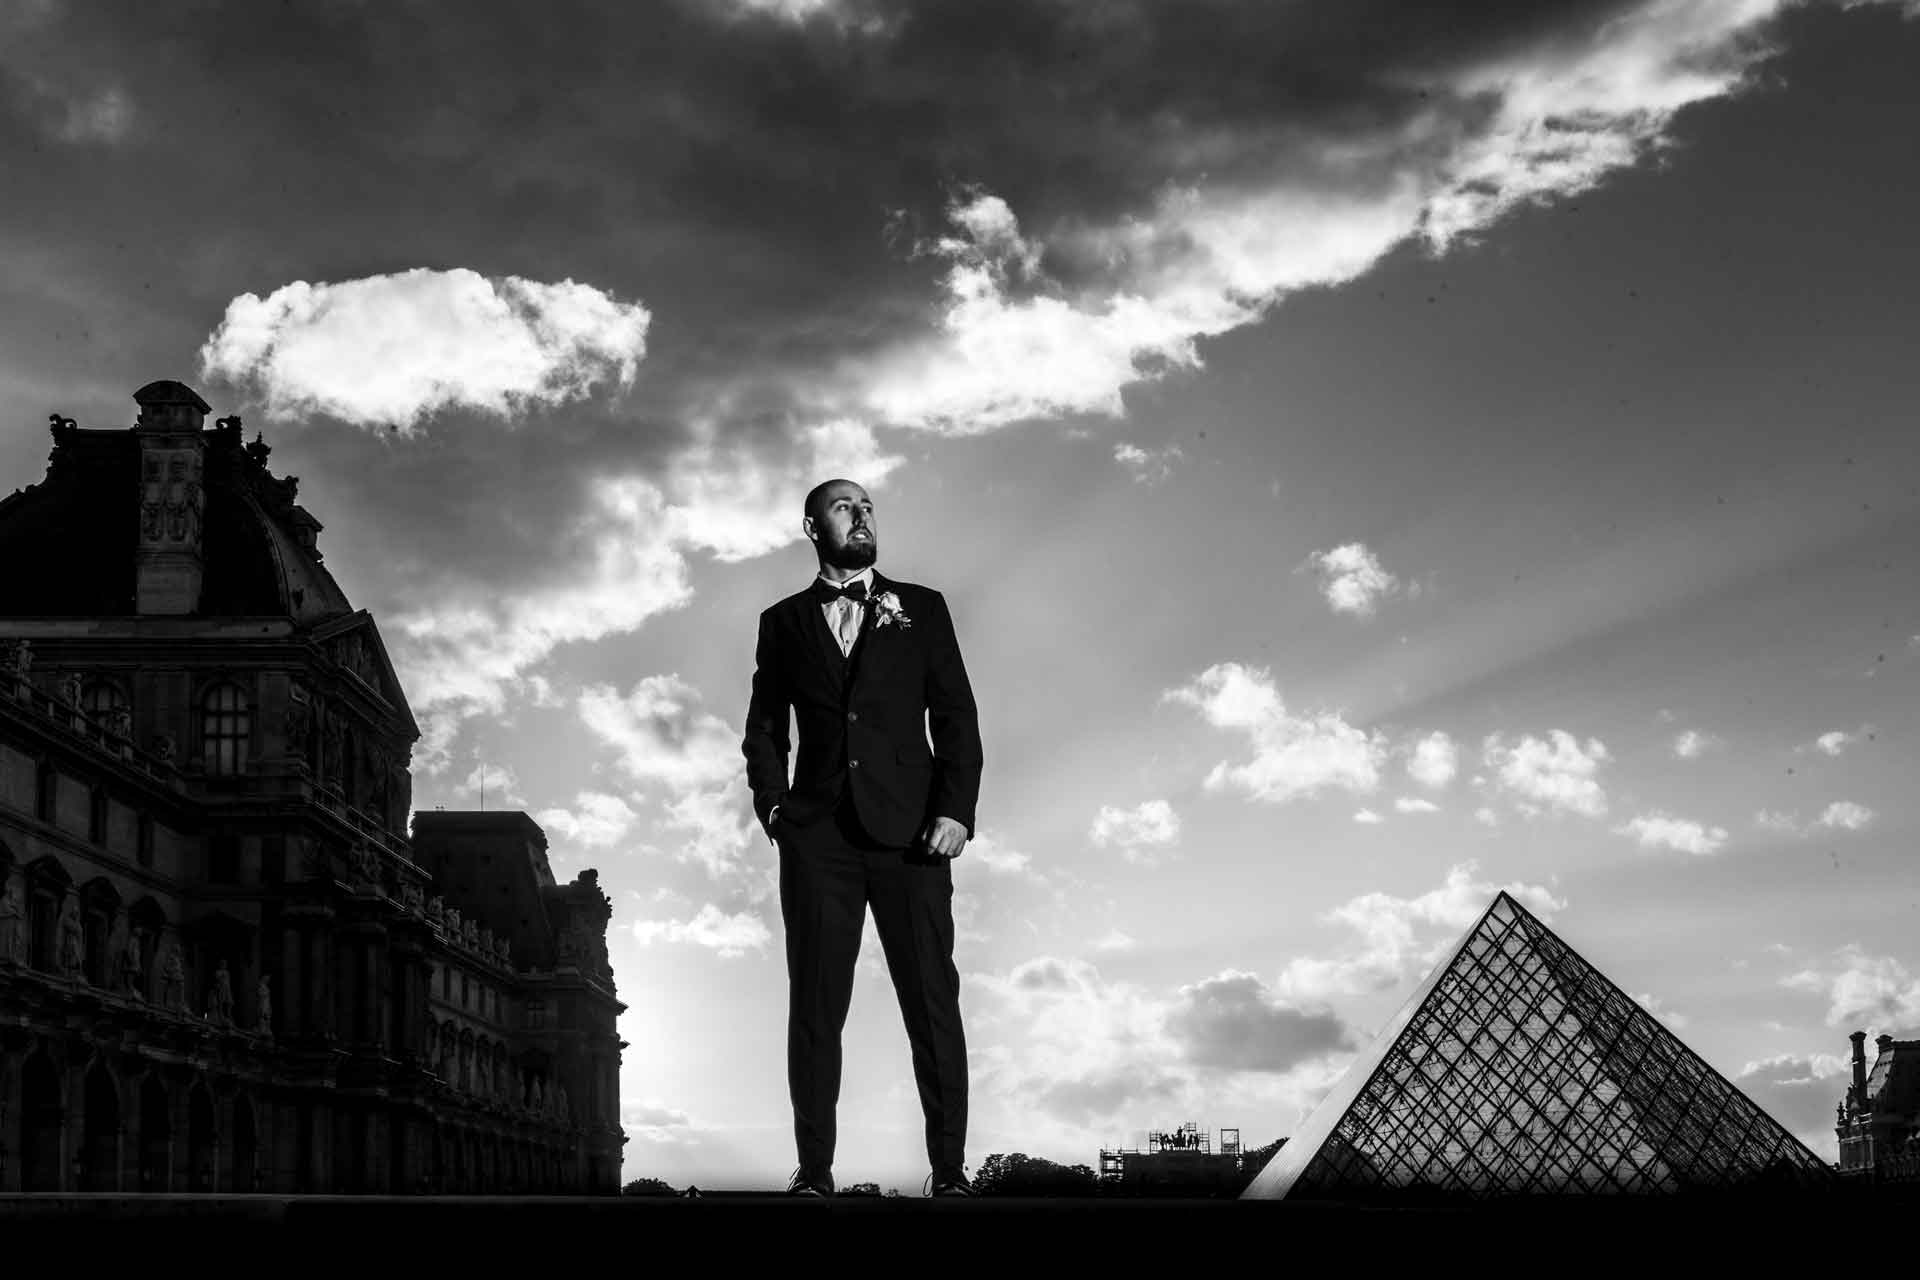 photo shoot at the Louvre in Paris